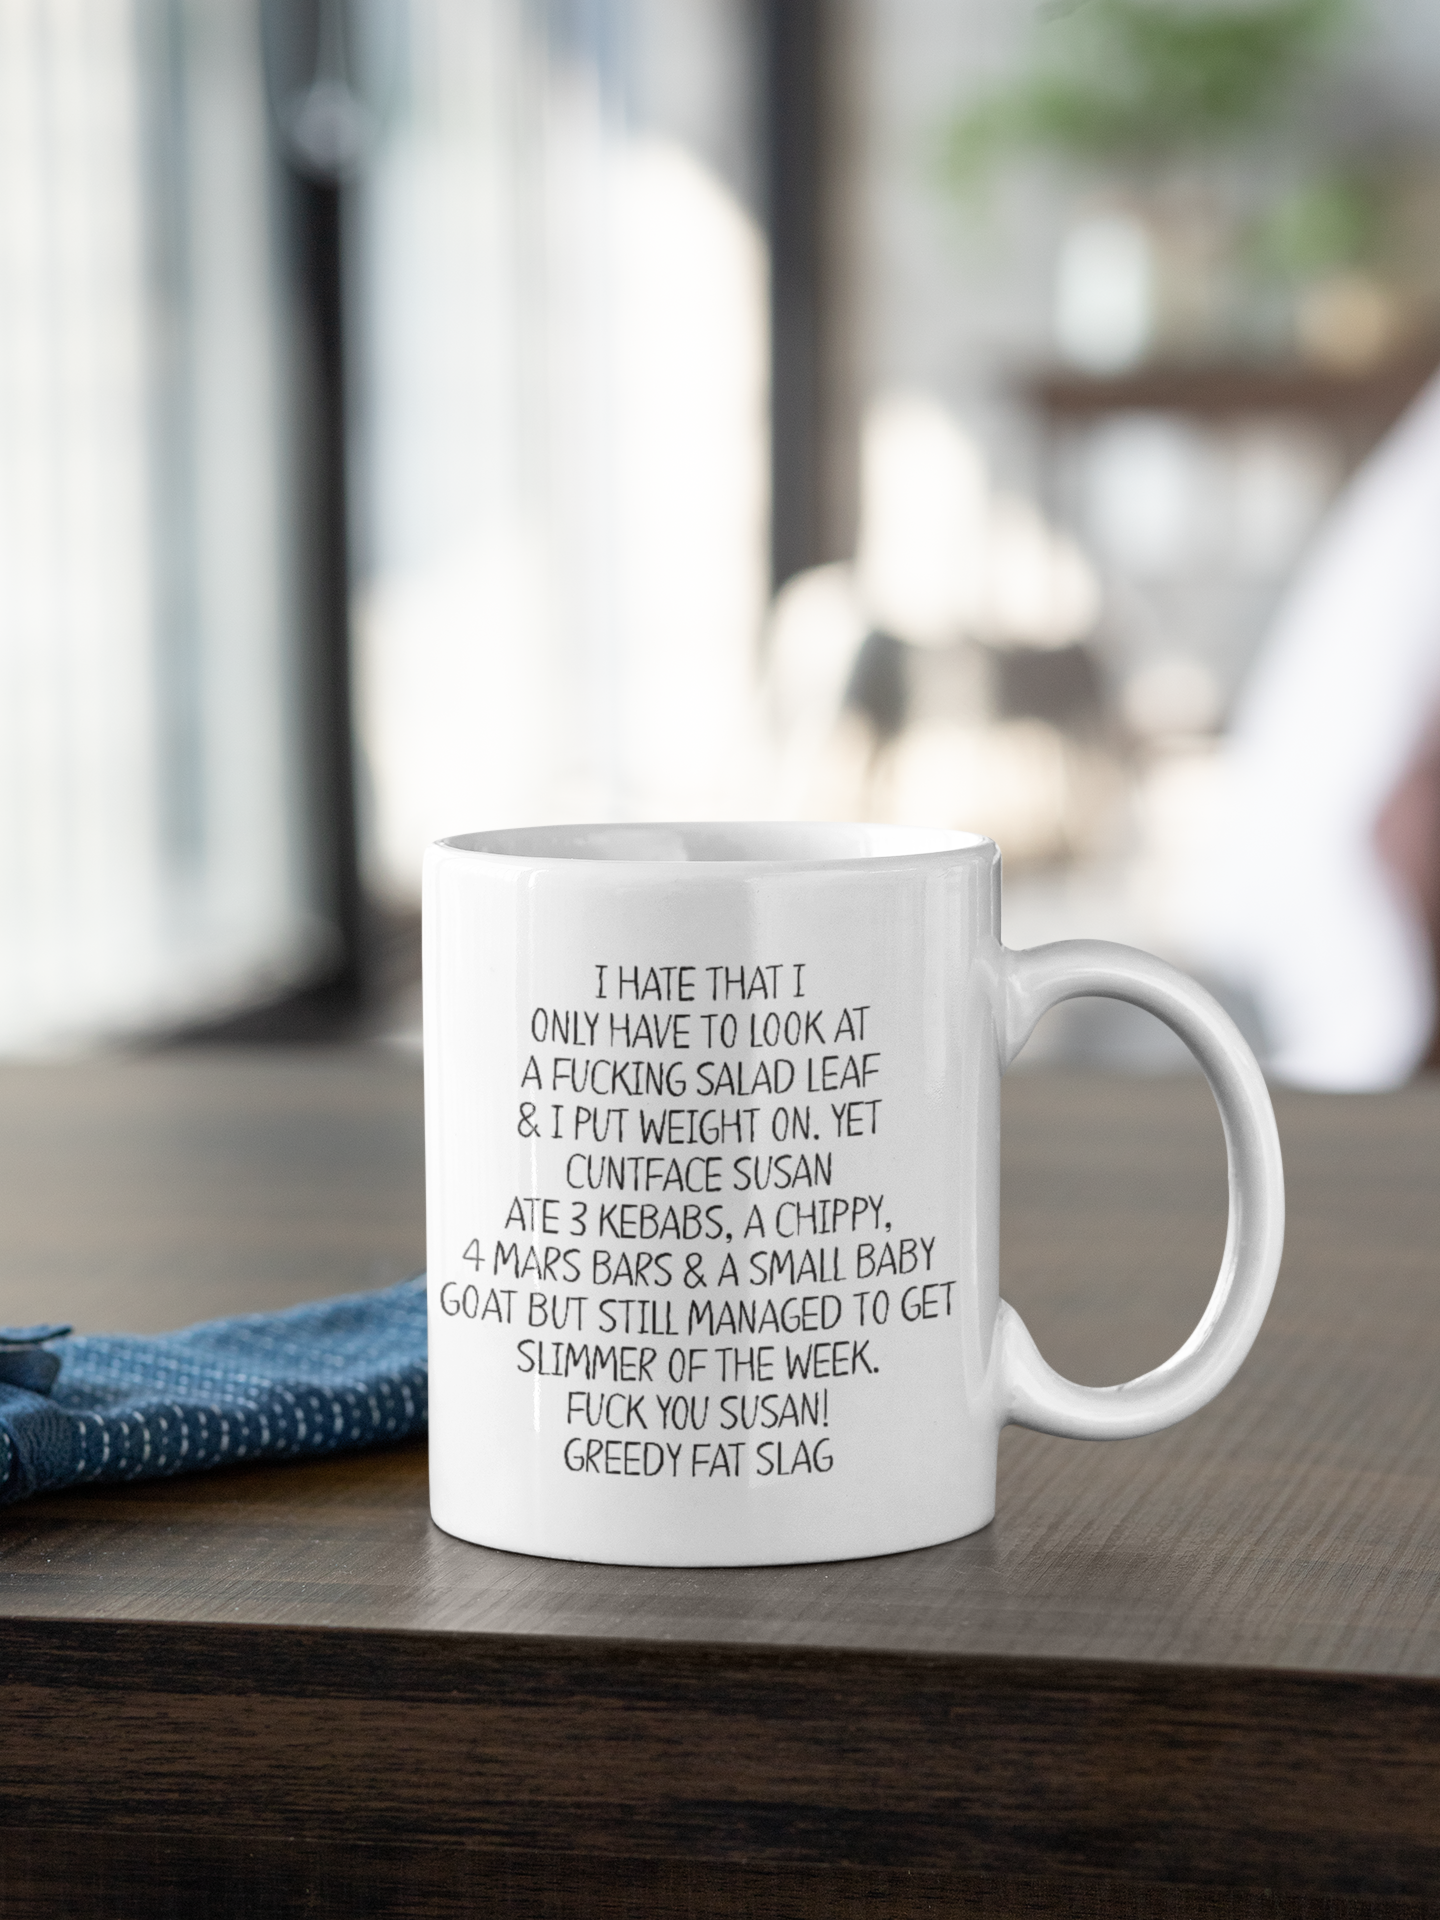 Very funny white ceramic mug with a quote printed to the front I hate that I only have to look at a fucking salad leaf and put weight on followed by more profanity references about weight gain and diet clubs.